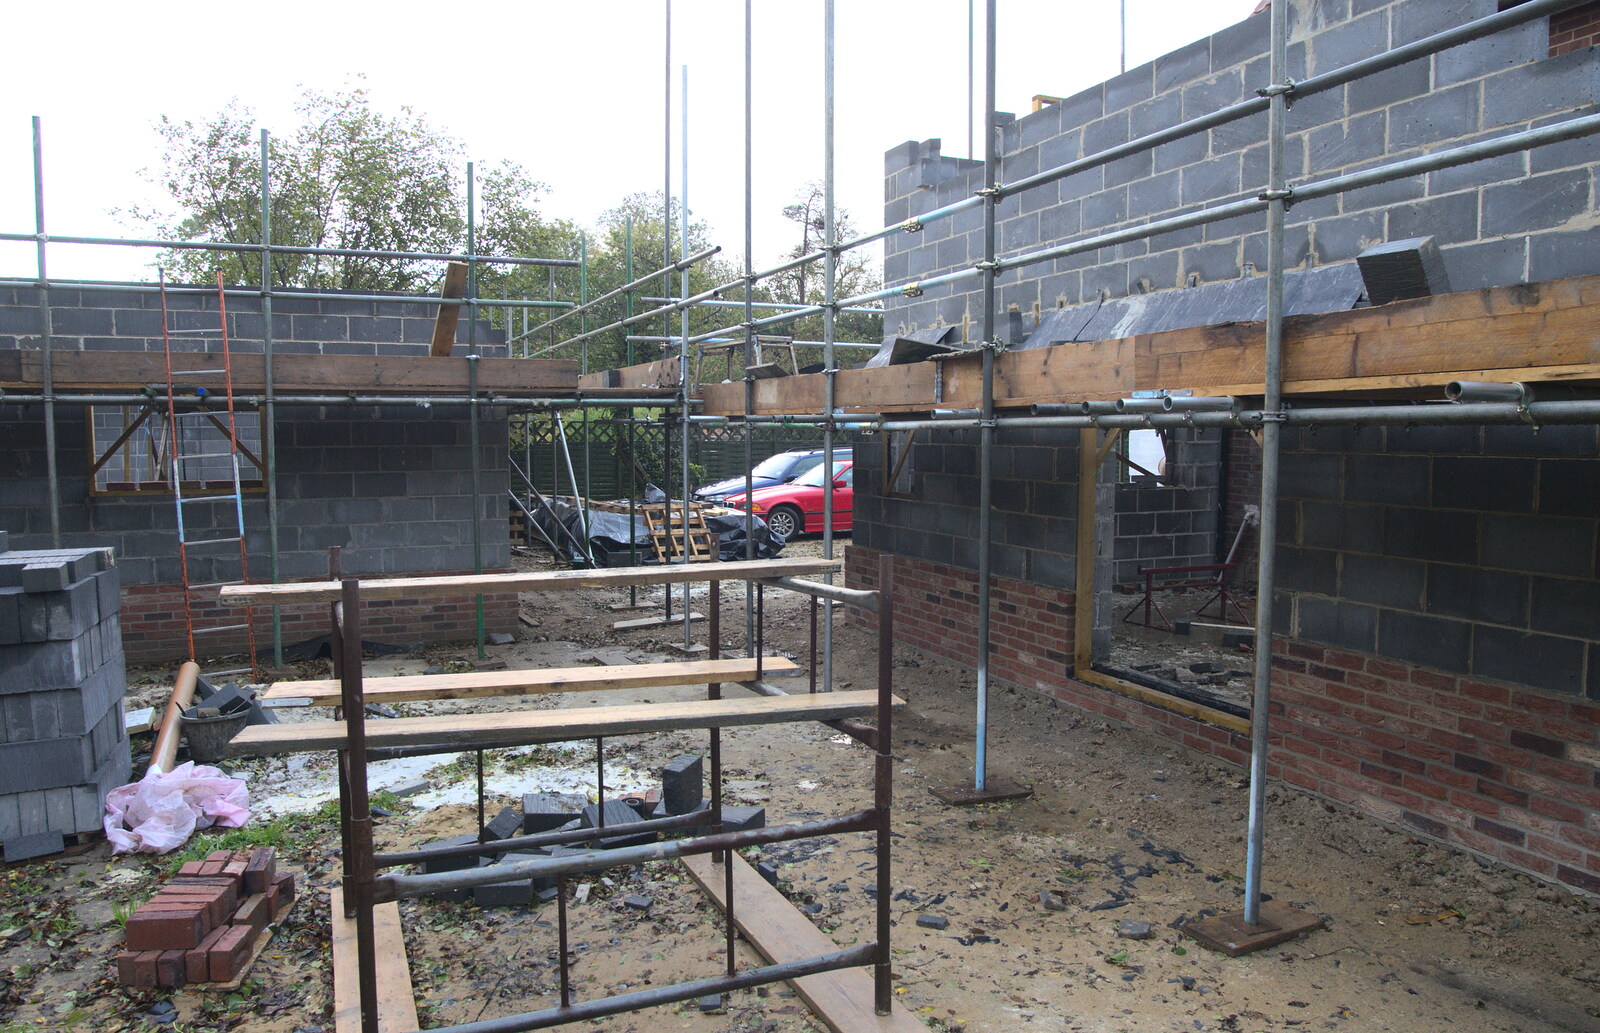 A November Miscellany and Building Progress, Thornham and Brome, Suffolk - 17th November 2013: Loads of building going on